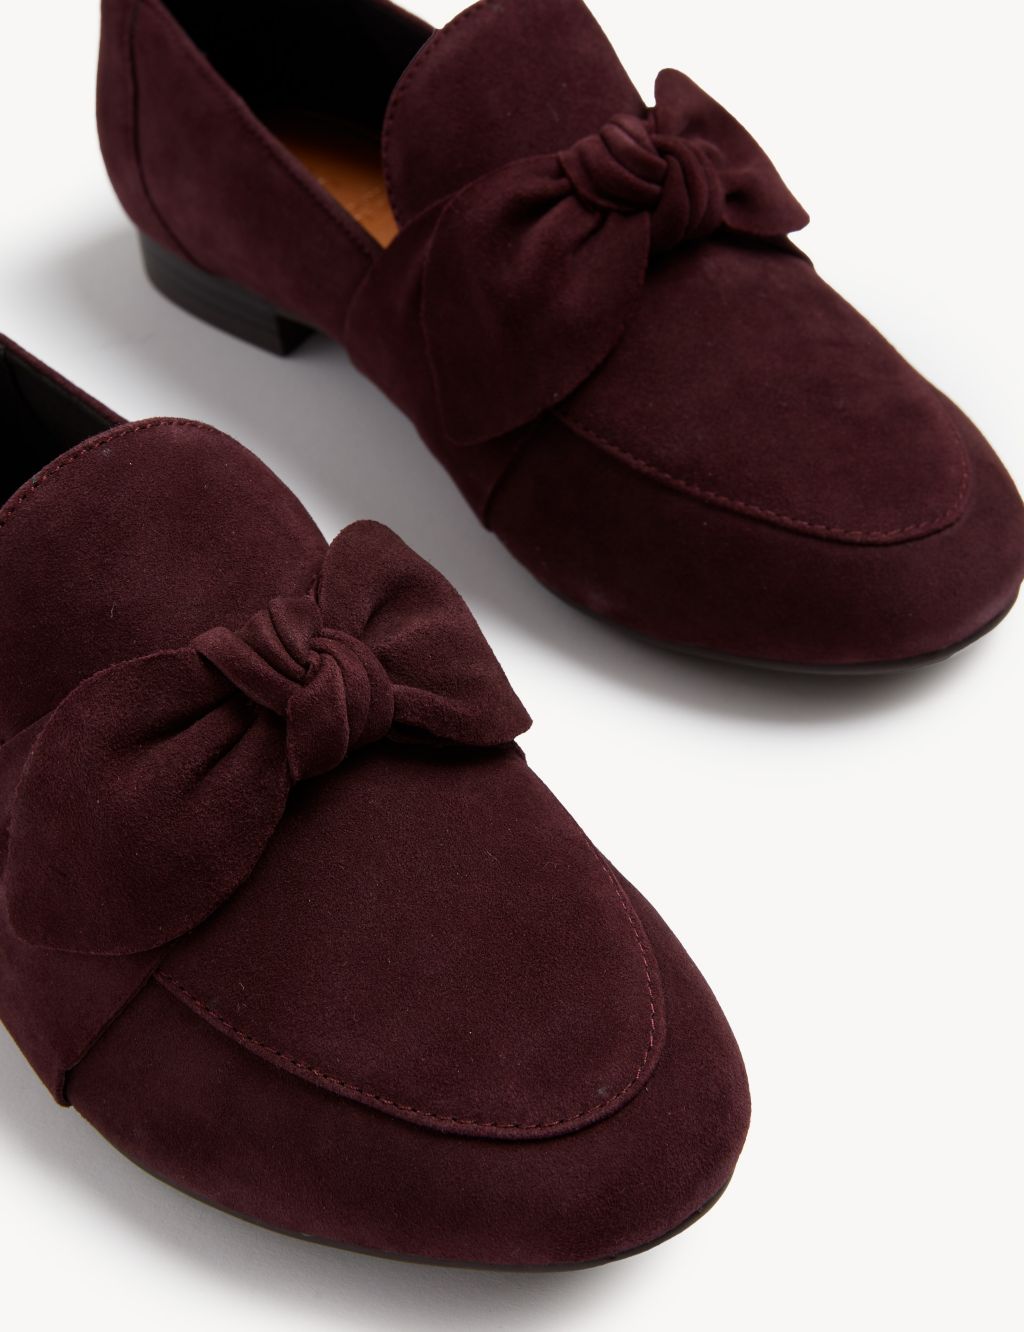 Wide Fit Suede Bow Flat Loafers image 3